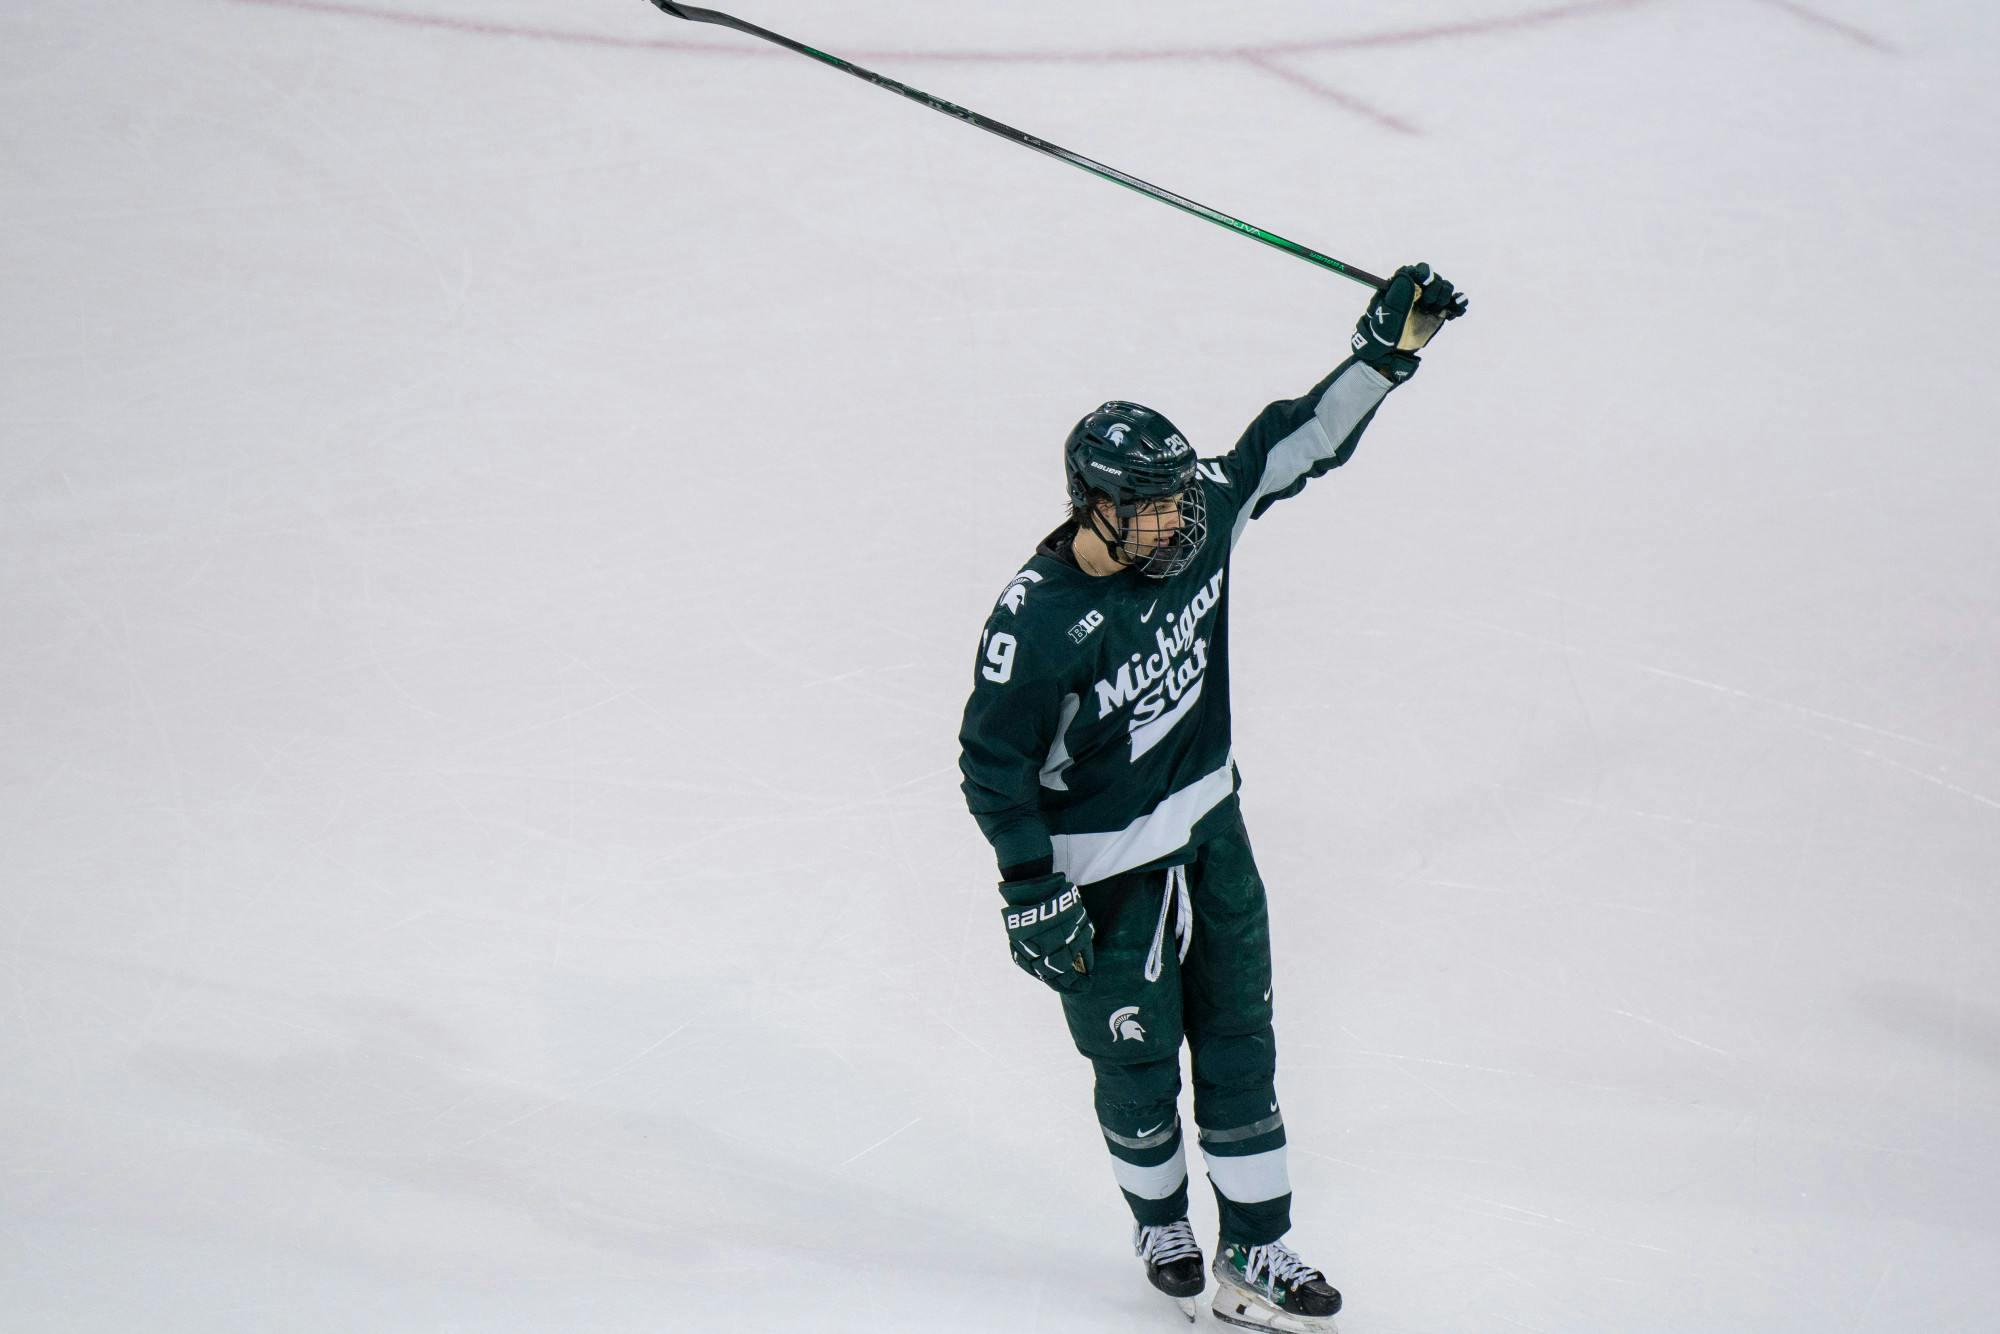 Freshman forward Gavin O'Connell (29) celebrates a scored goal during a game against University of Michigan at Yost Ice Arena on Feb. 9, 2024. O'Connell scored 1 of the 5 Spartan goals as they took down the Wolverines.